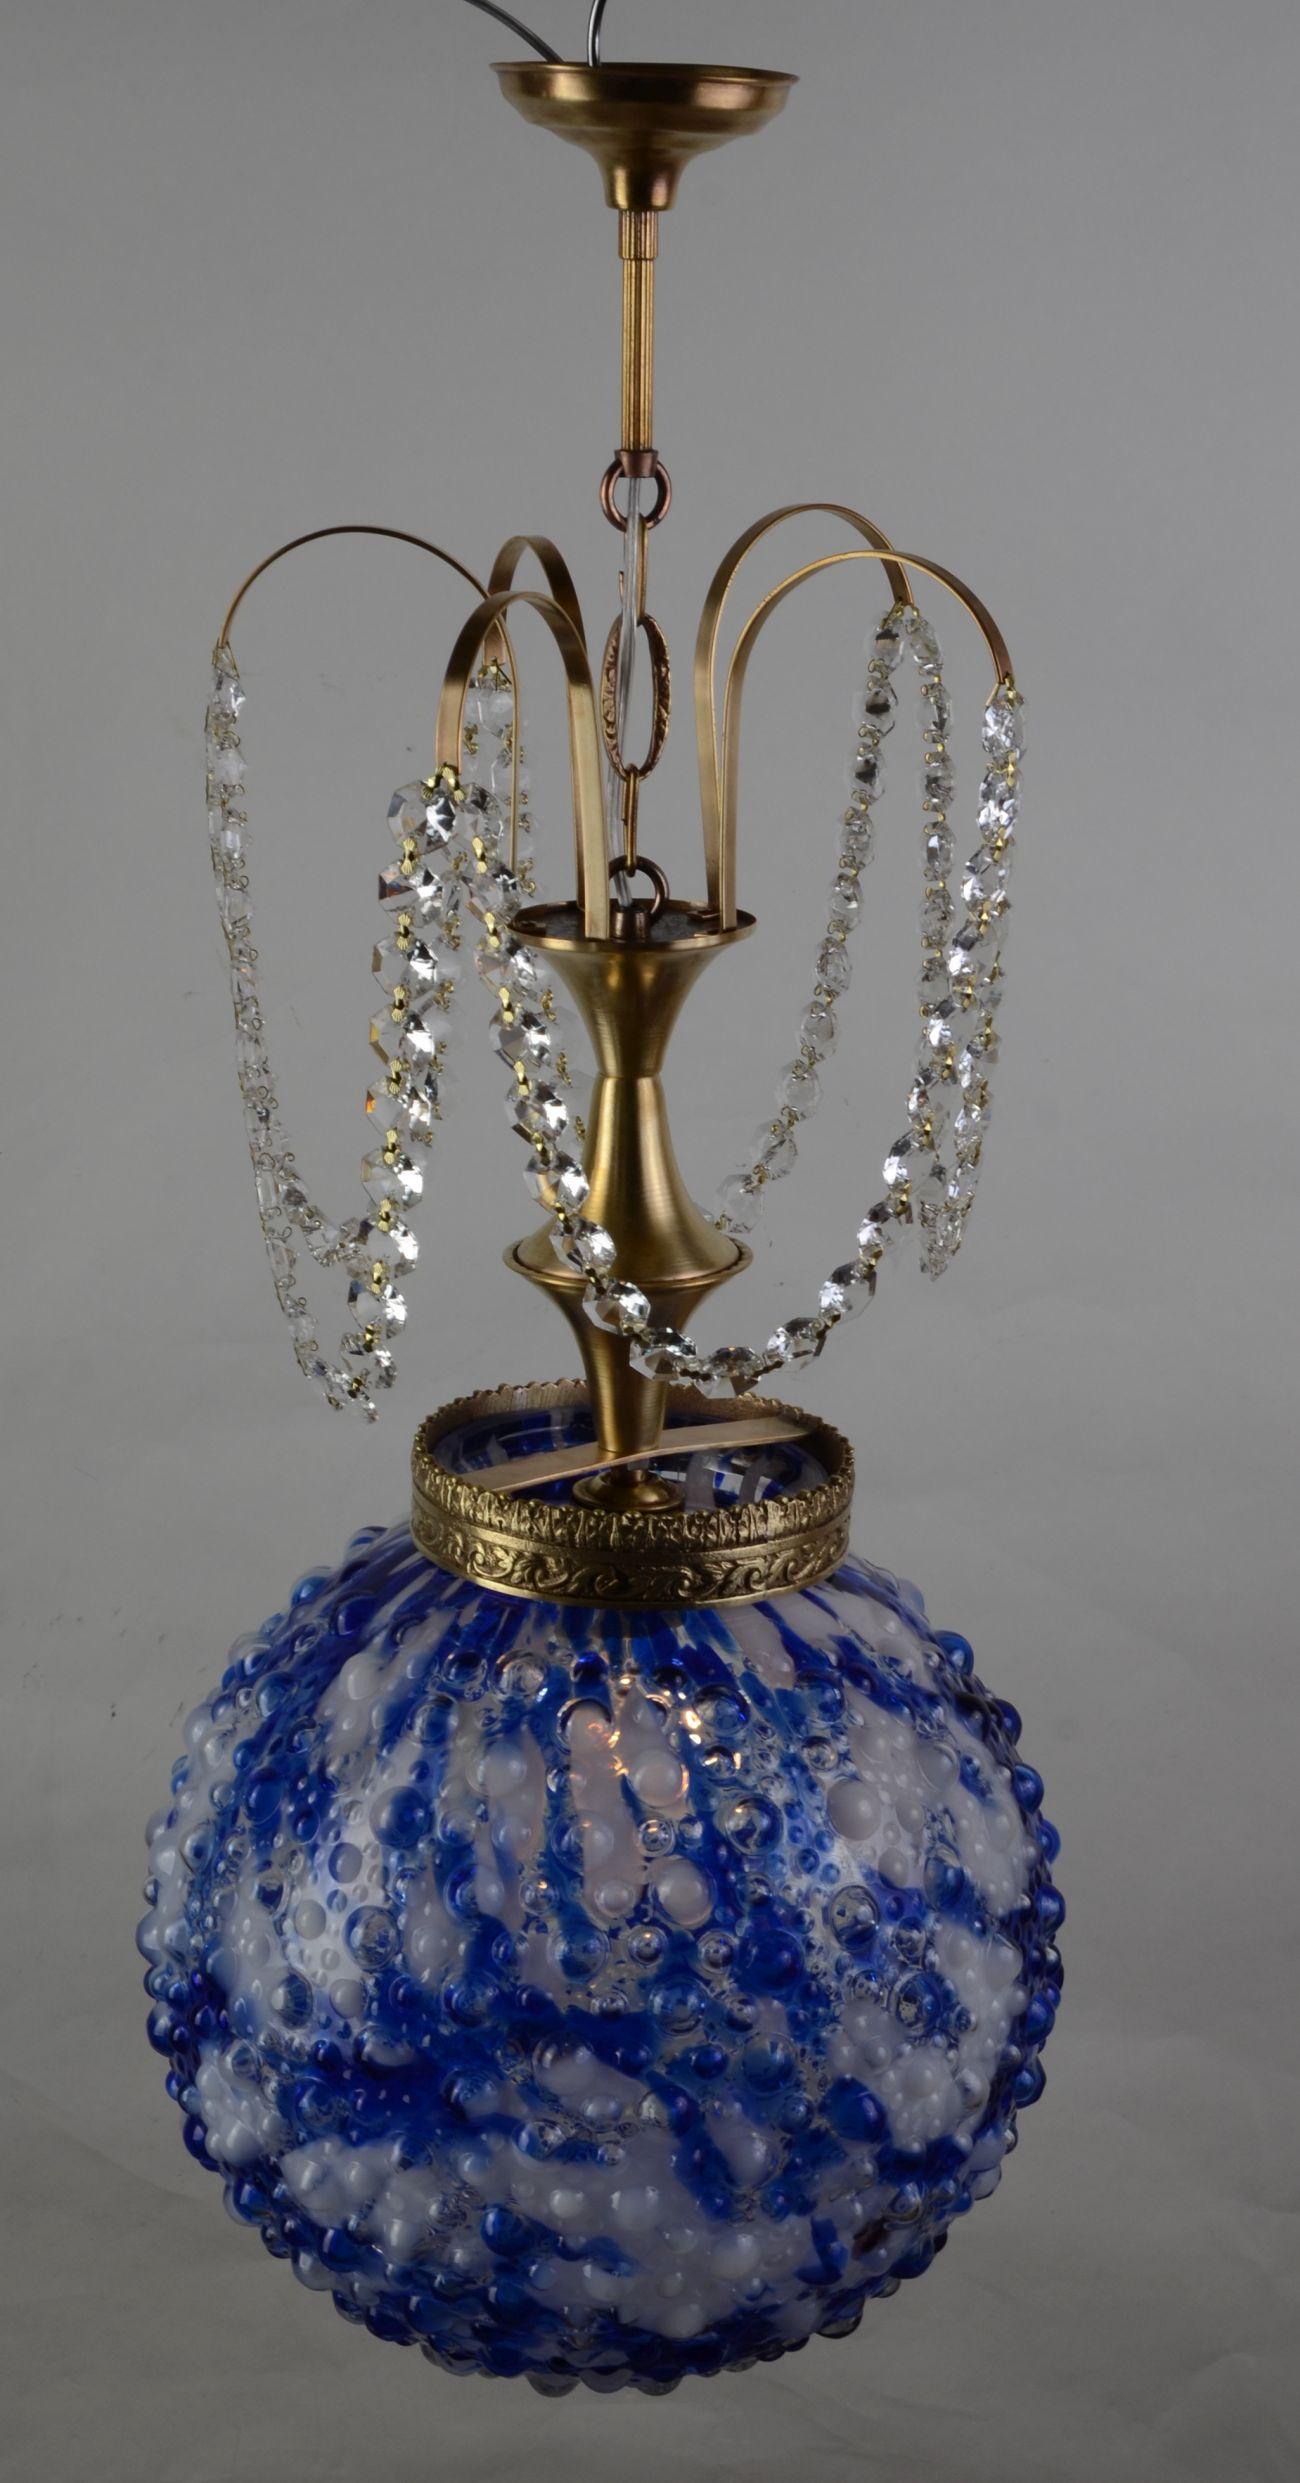 1950s Brass Ceiling Lamp with Original Murano Glass Lampshade, Spain 1